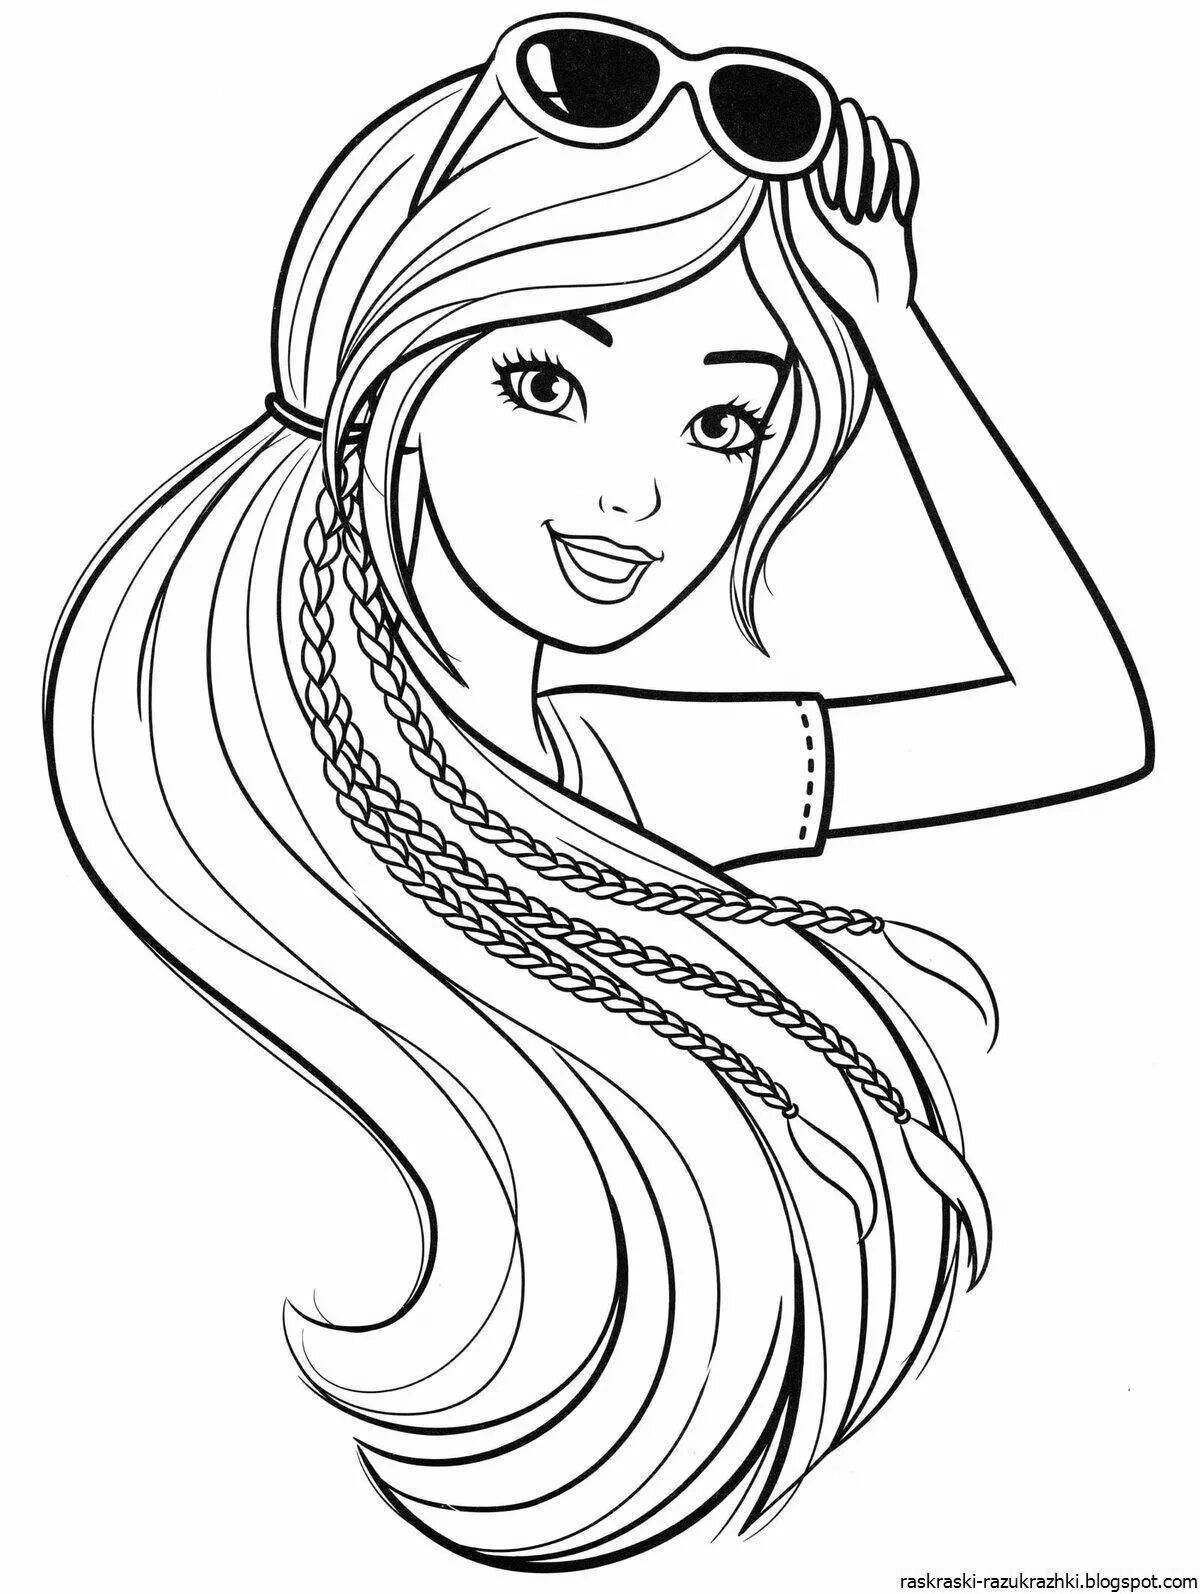 Fairytale coloring book for girls